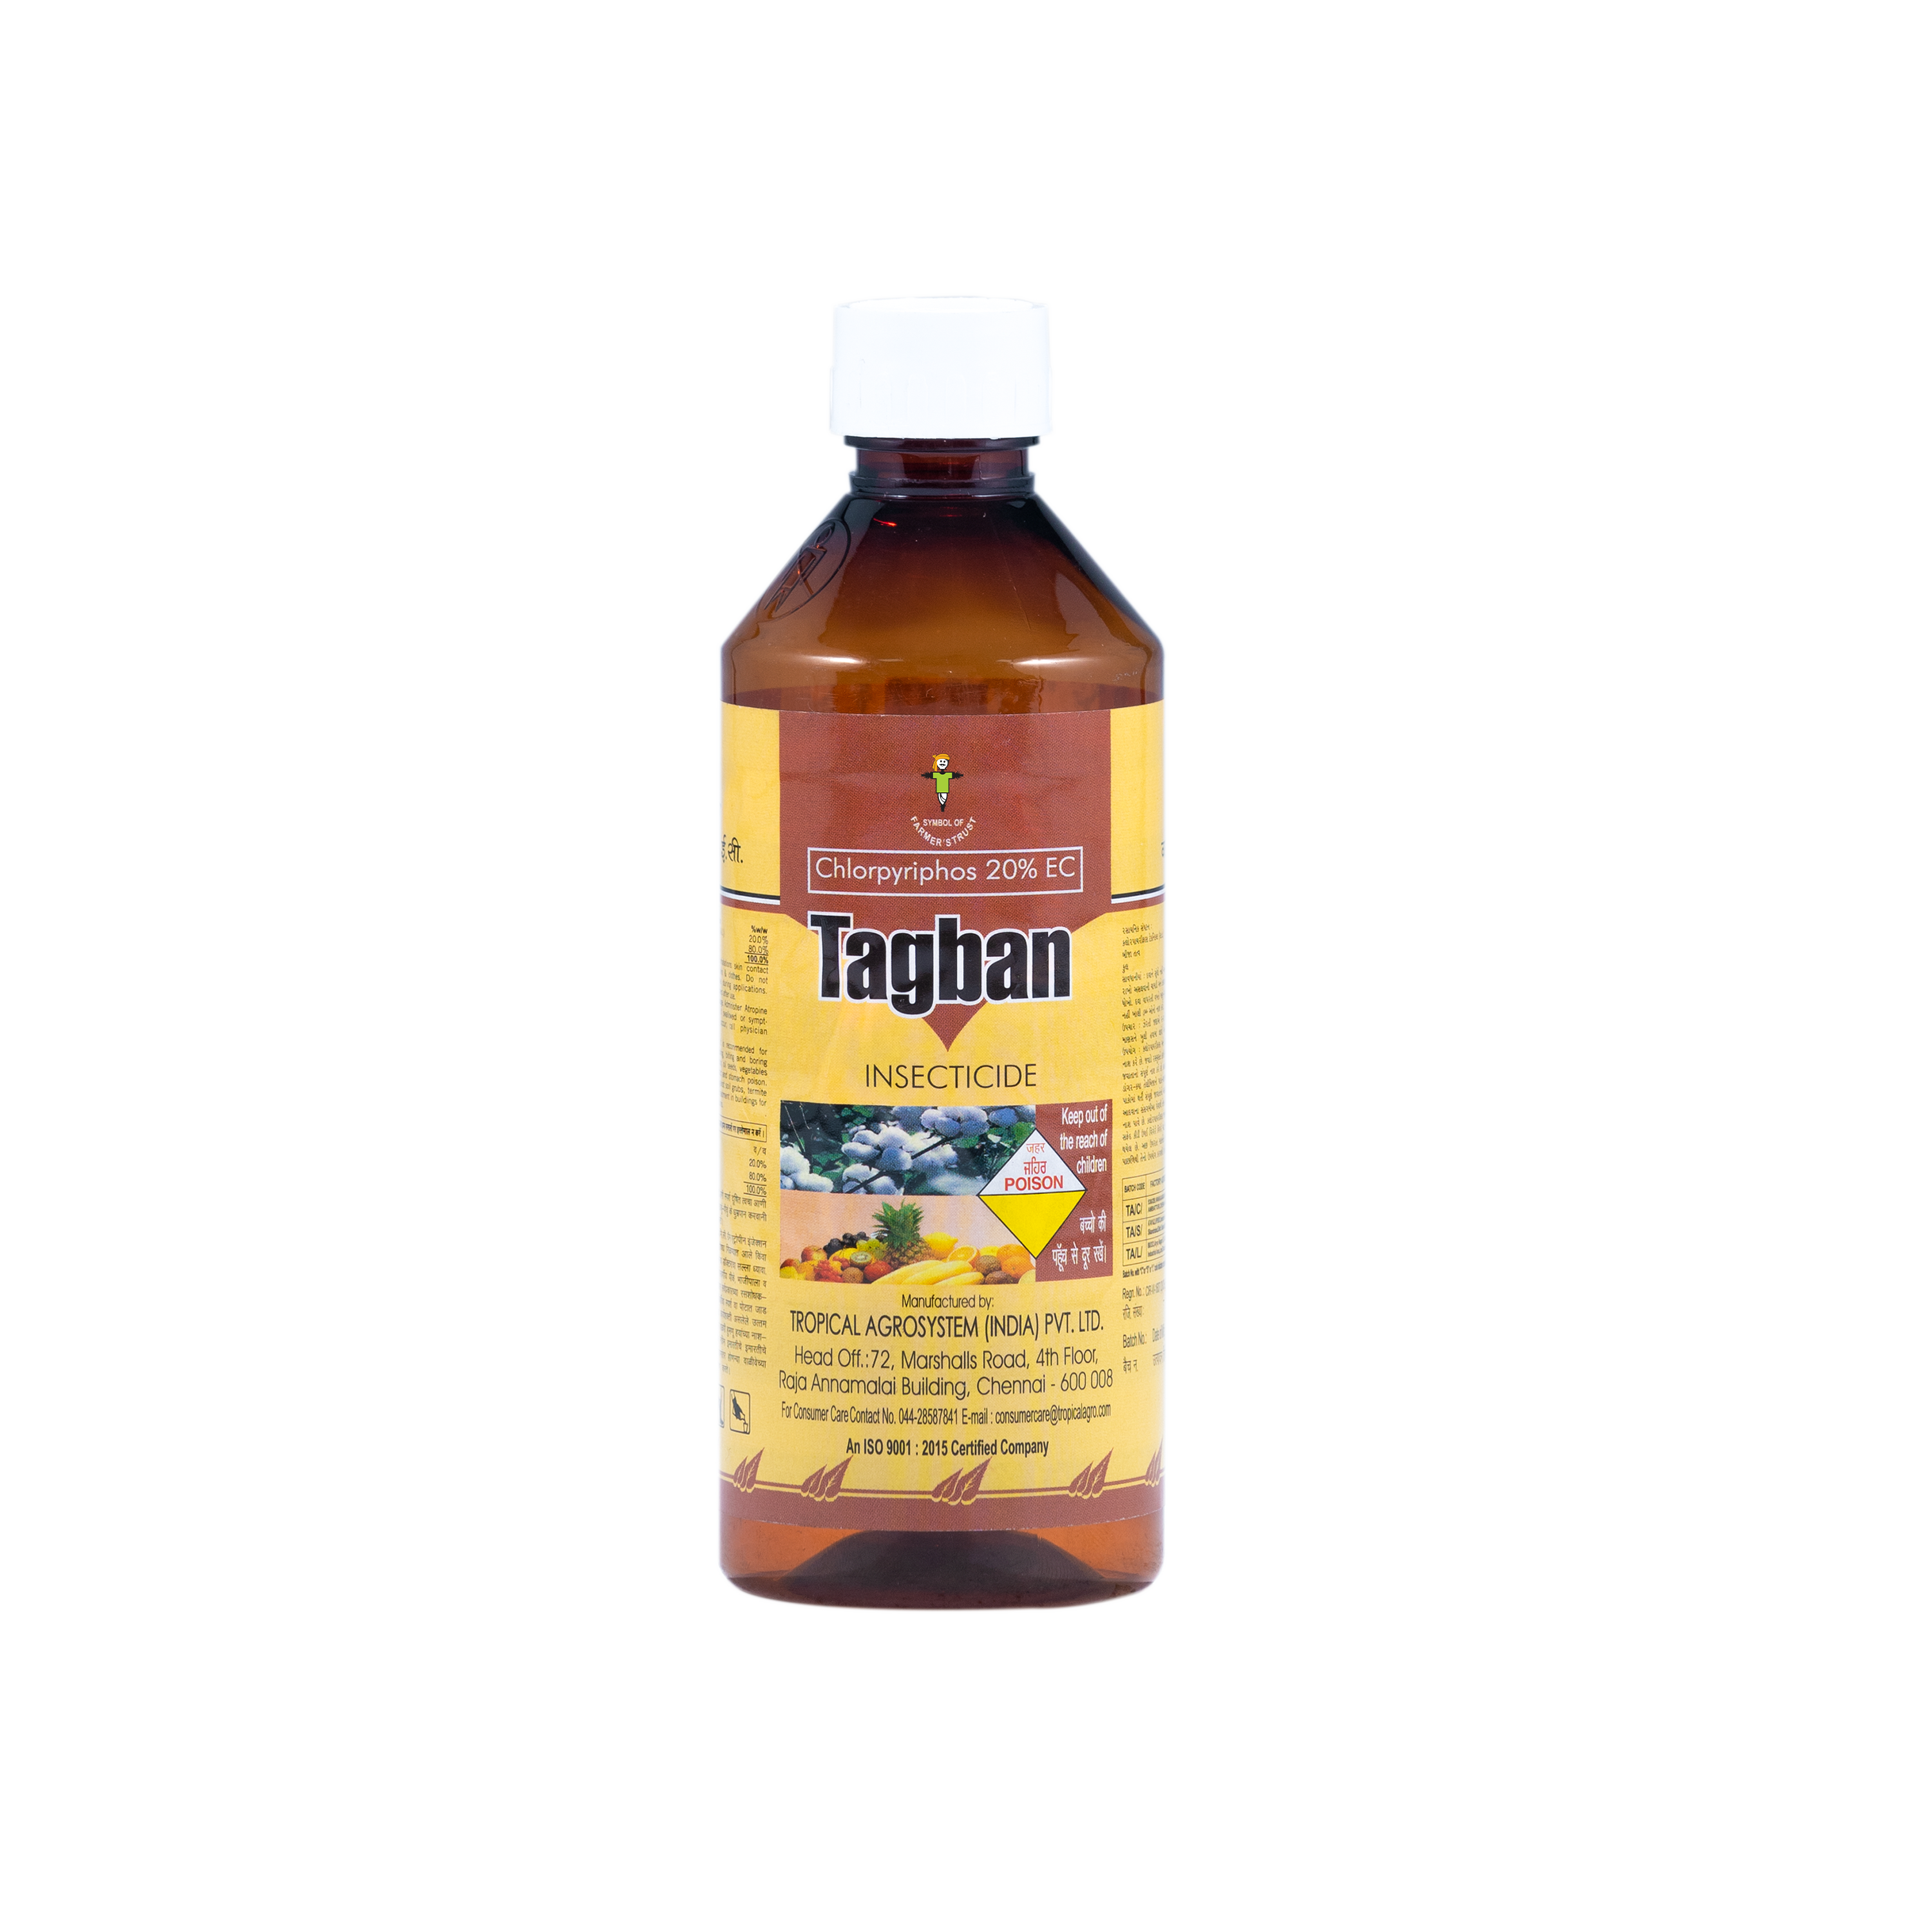 Tagban Agricultural Insecticide